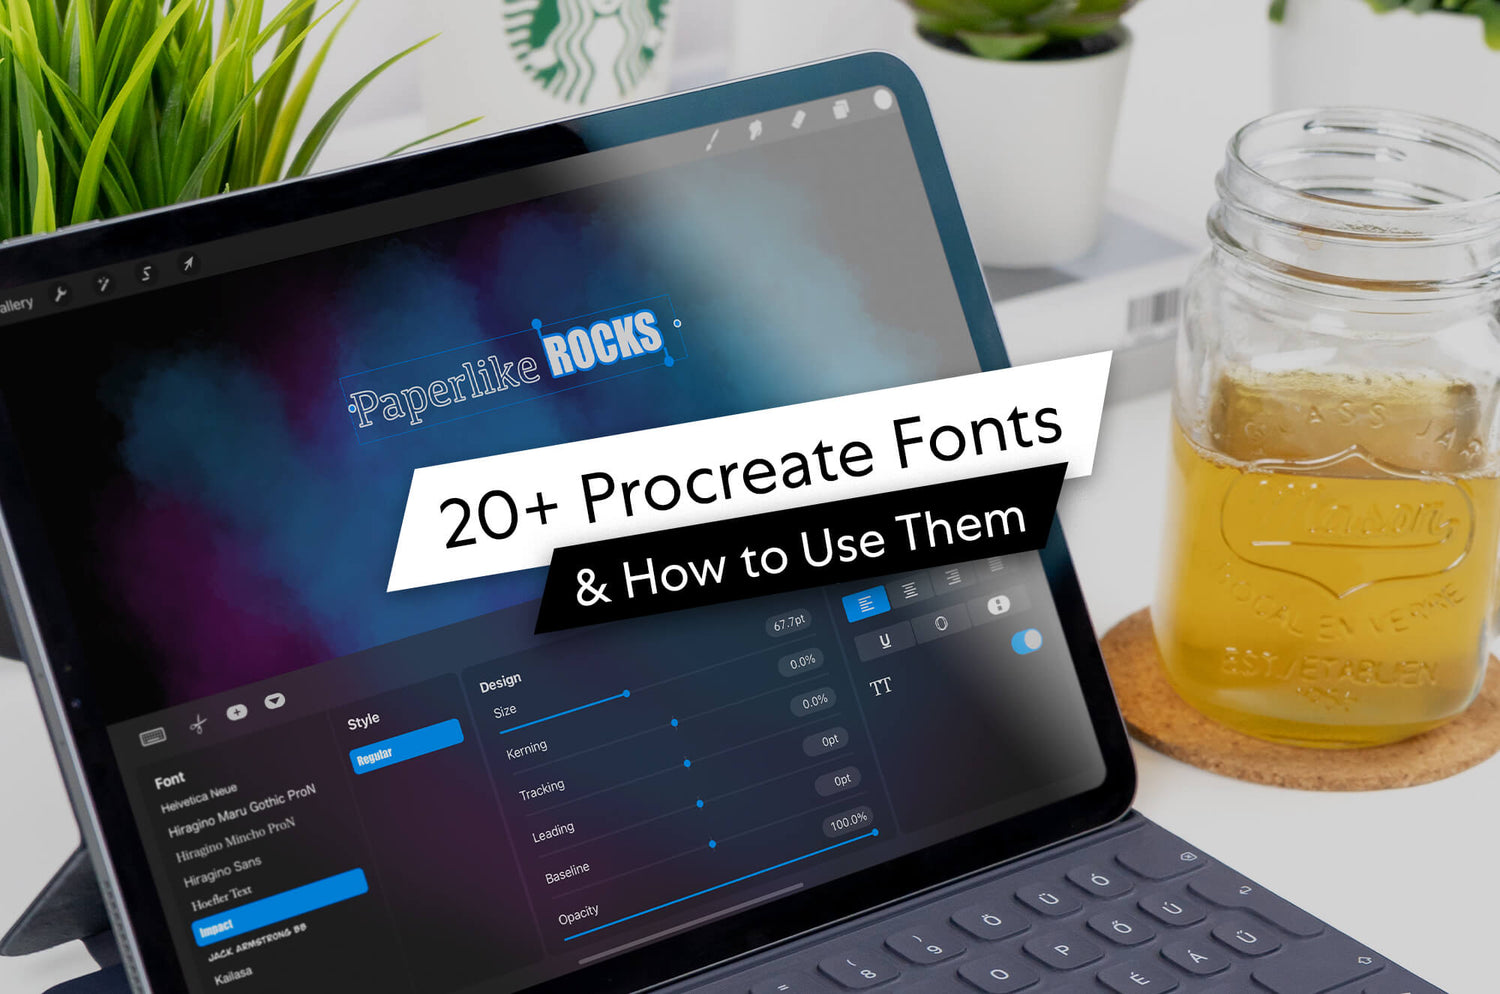 20+ Procreate Fonts & How to Use Them